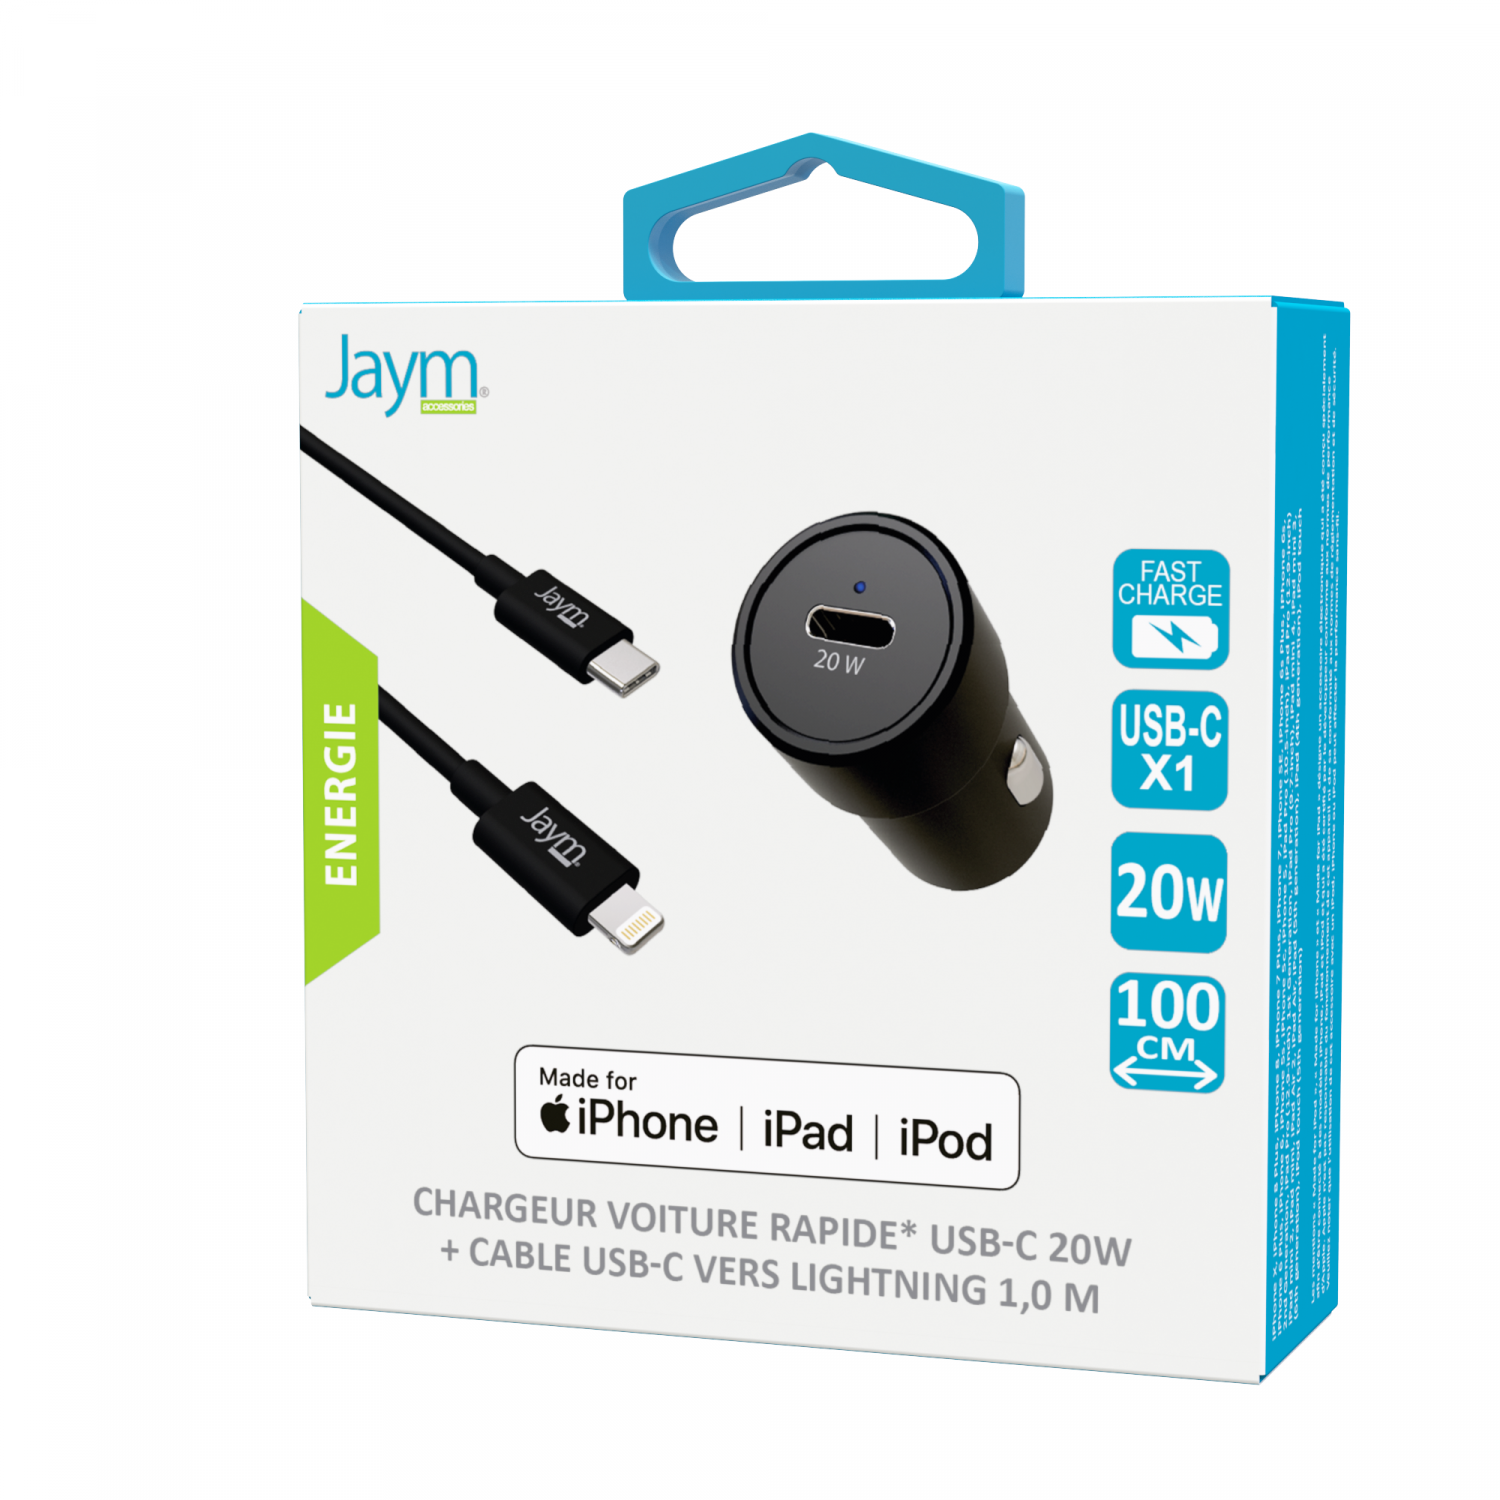 PACK CHARGEUR VOITURE RAPIDE USB-C 20W PD 12/24V + CABLE USB-C VERS  LIGHTNING MFI 1M NOIRS - JAYM®